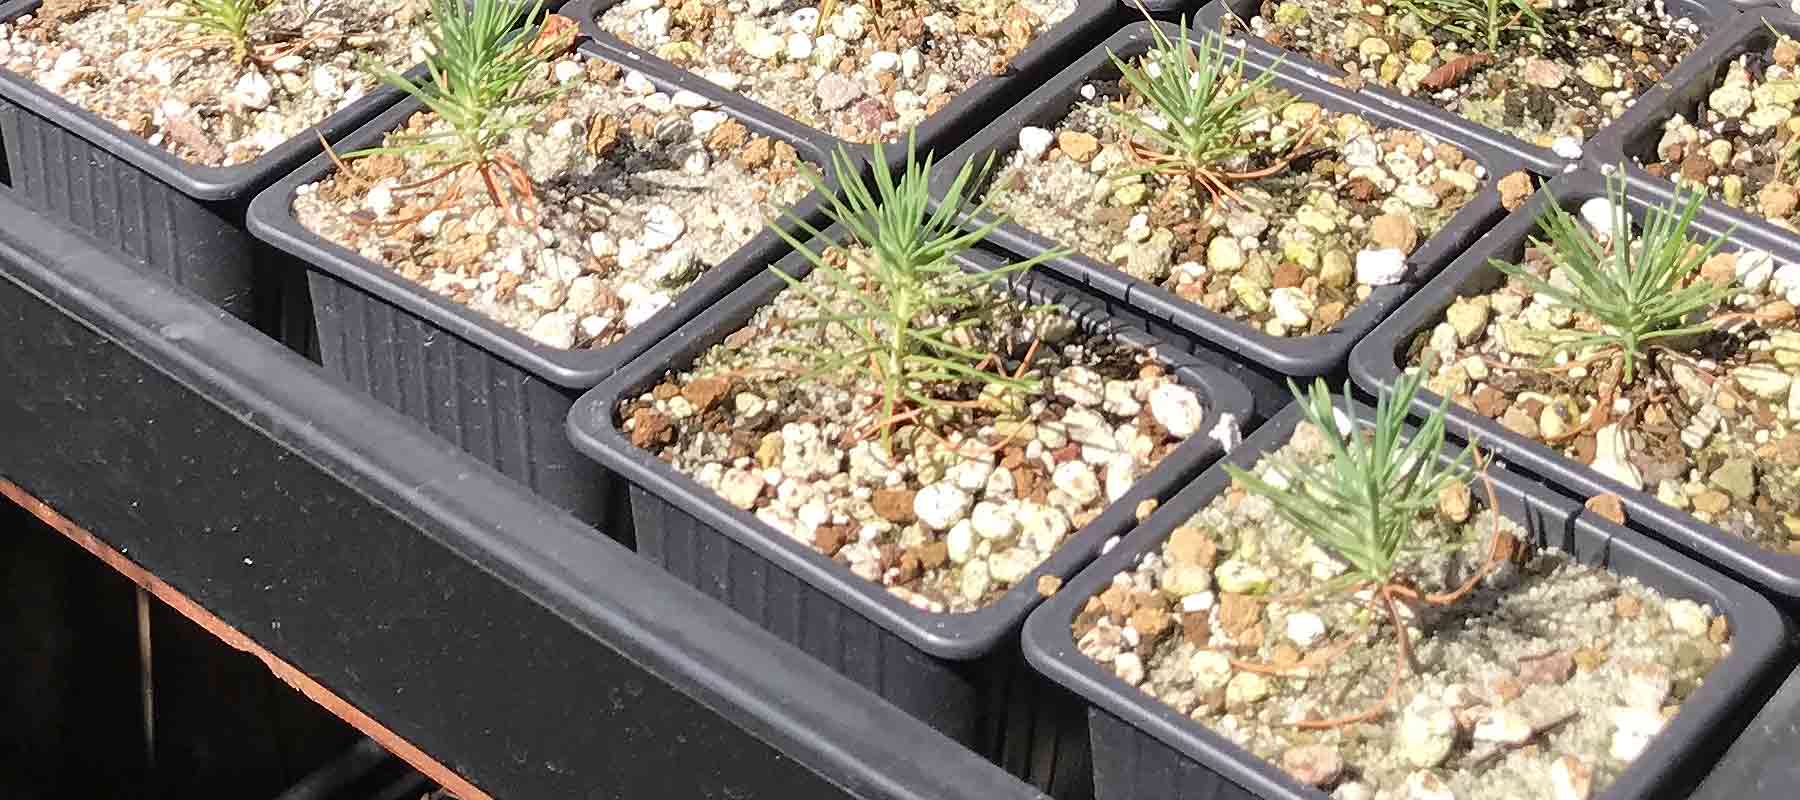 Plastic Seedling & Growing Containers